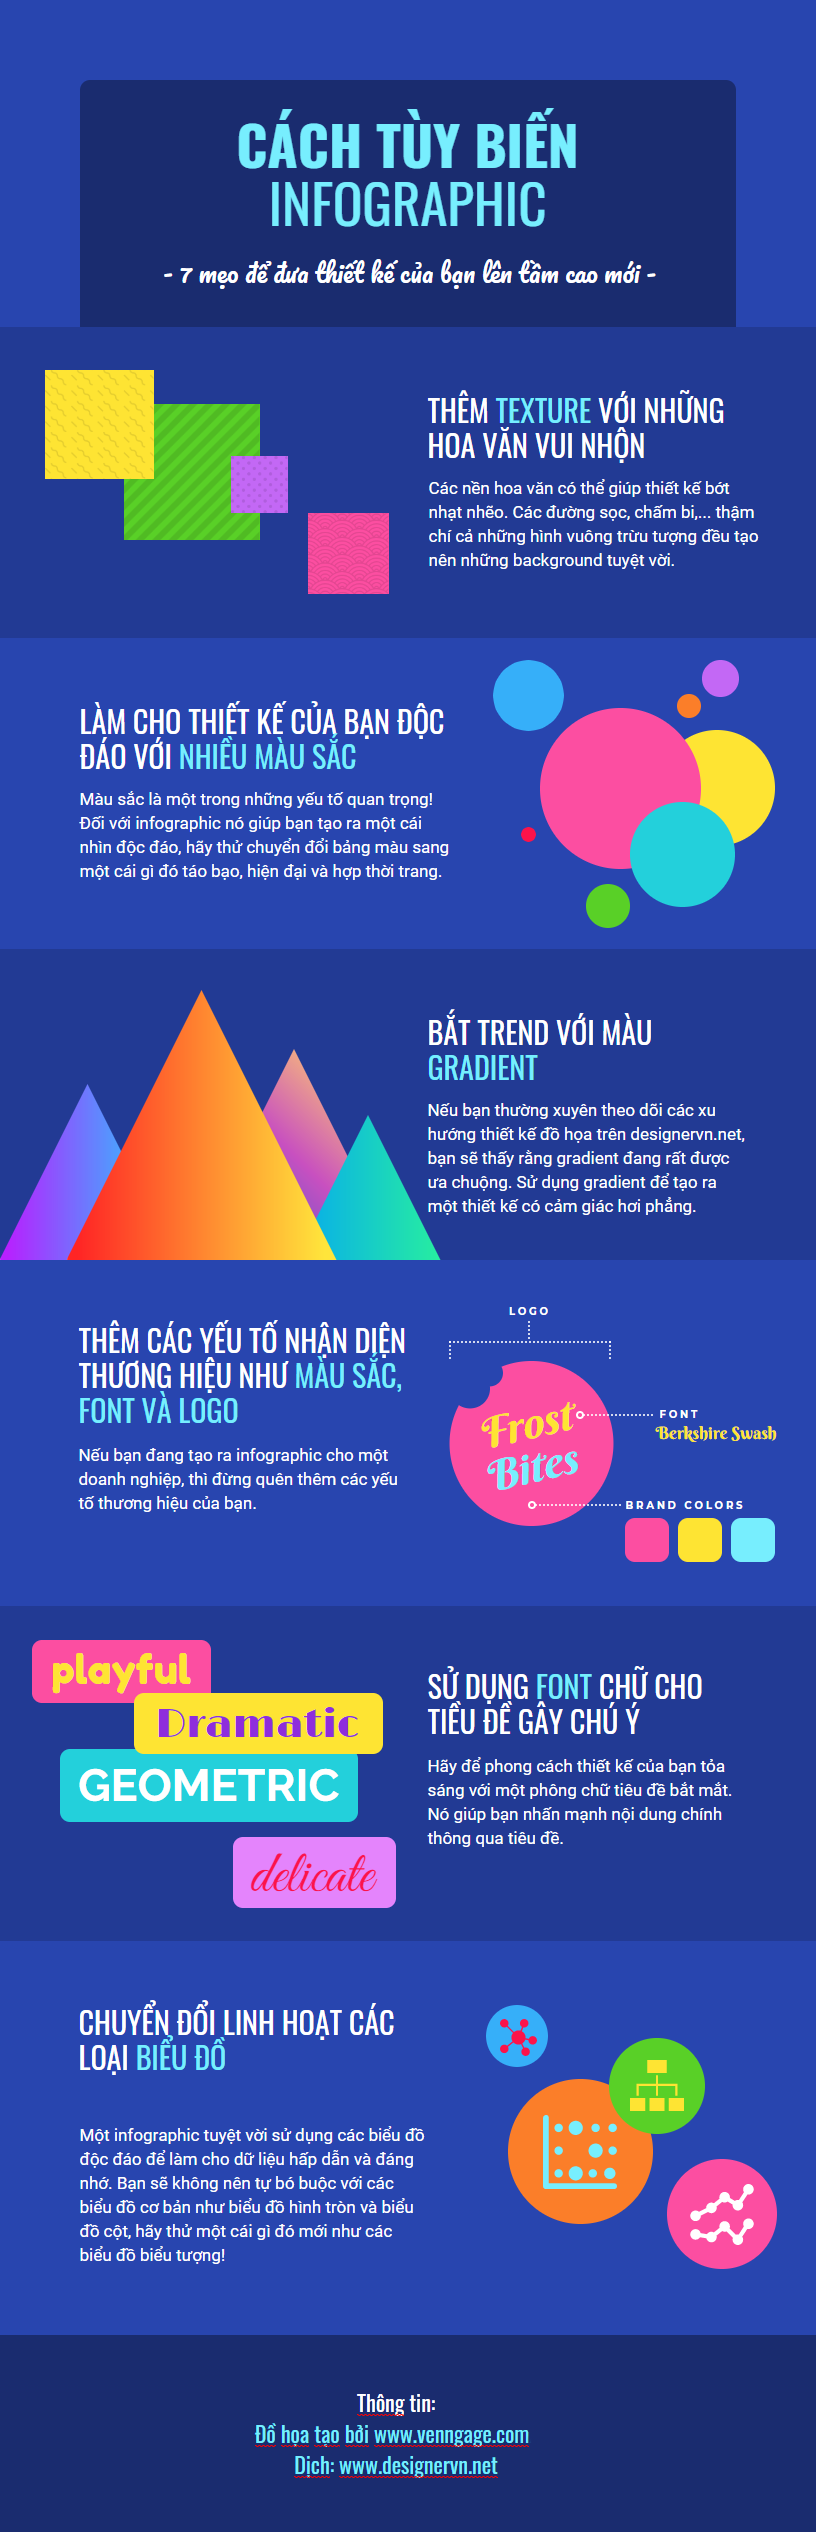 infographic-tips-design.png